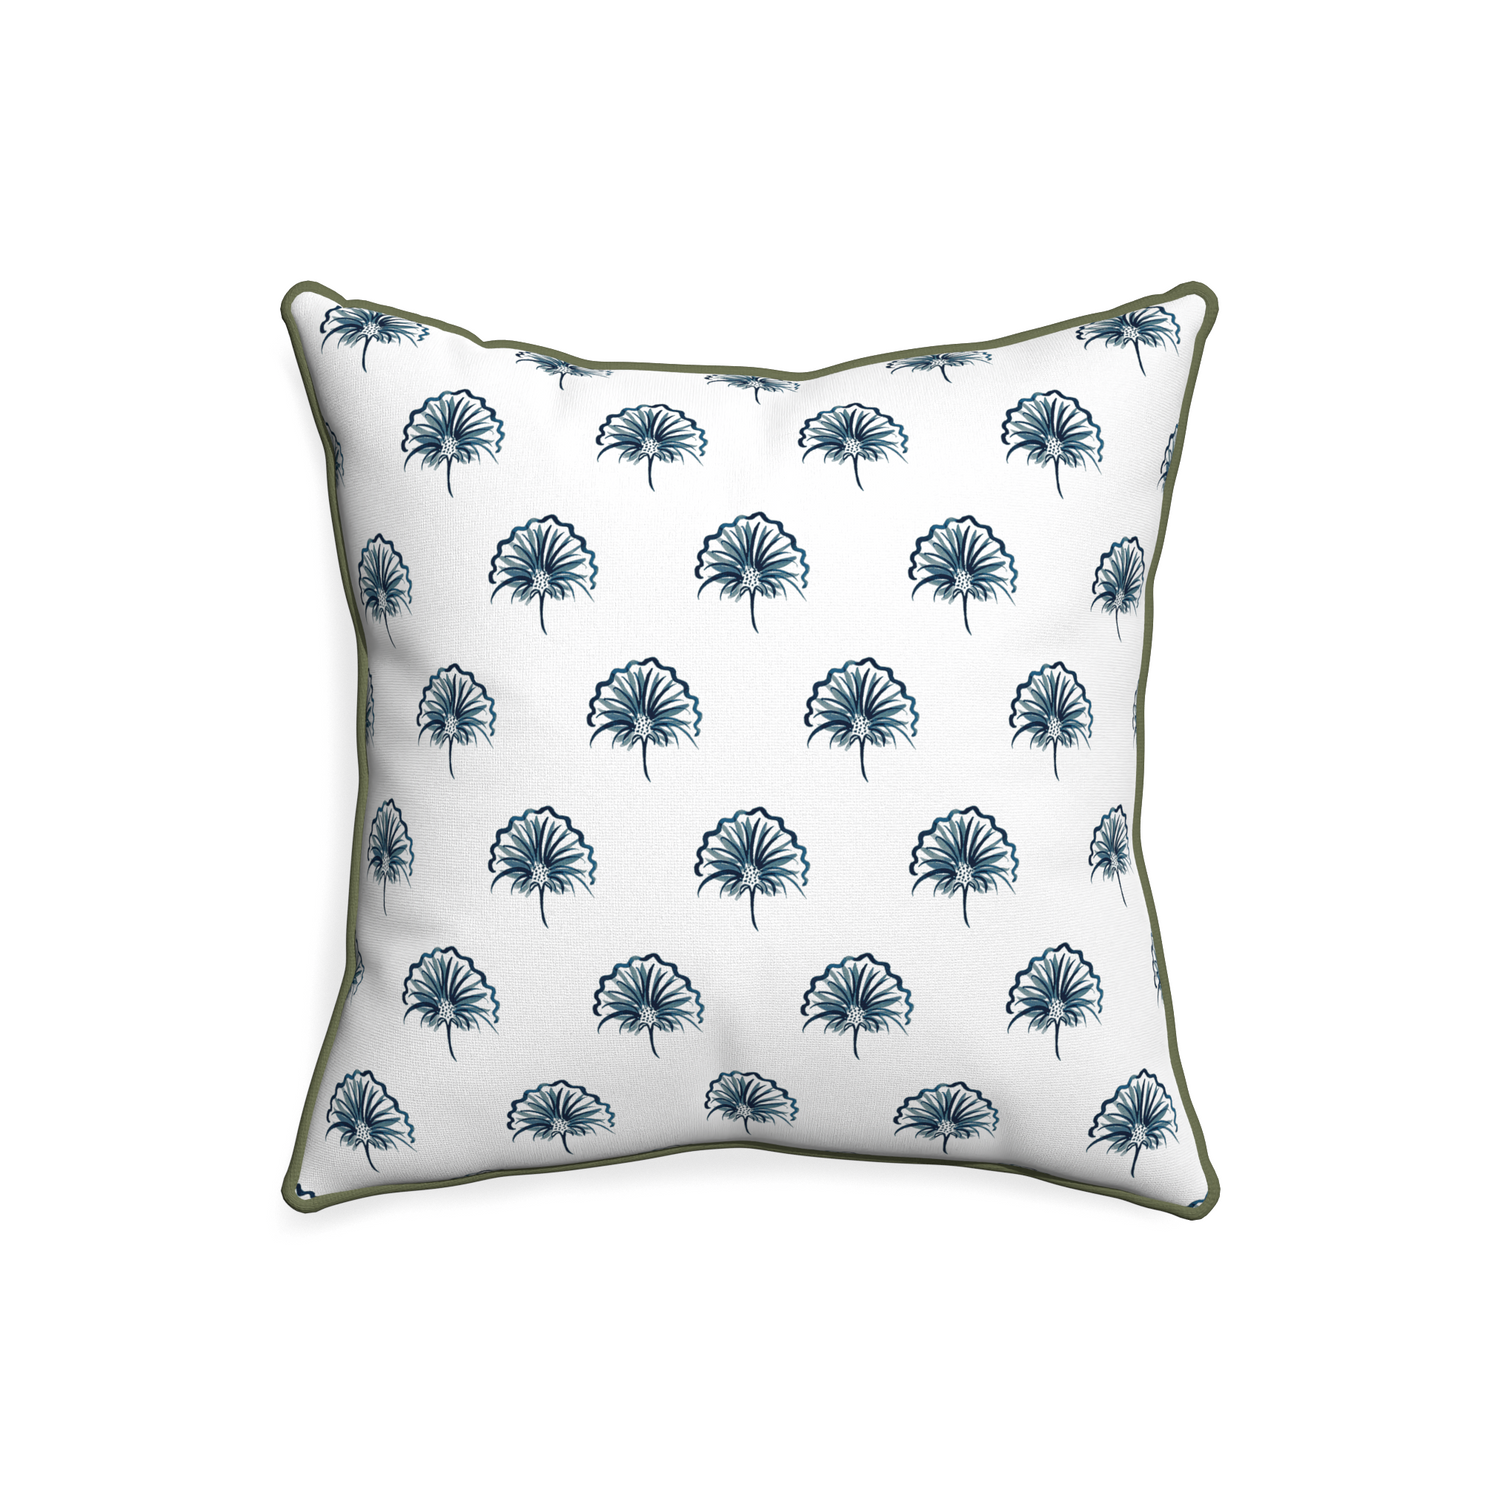 20-square penelope midnight custom pillow with f piping on white background